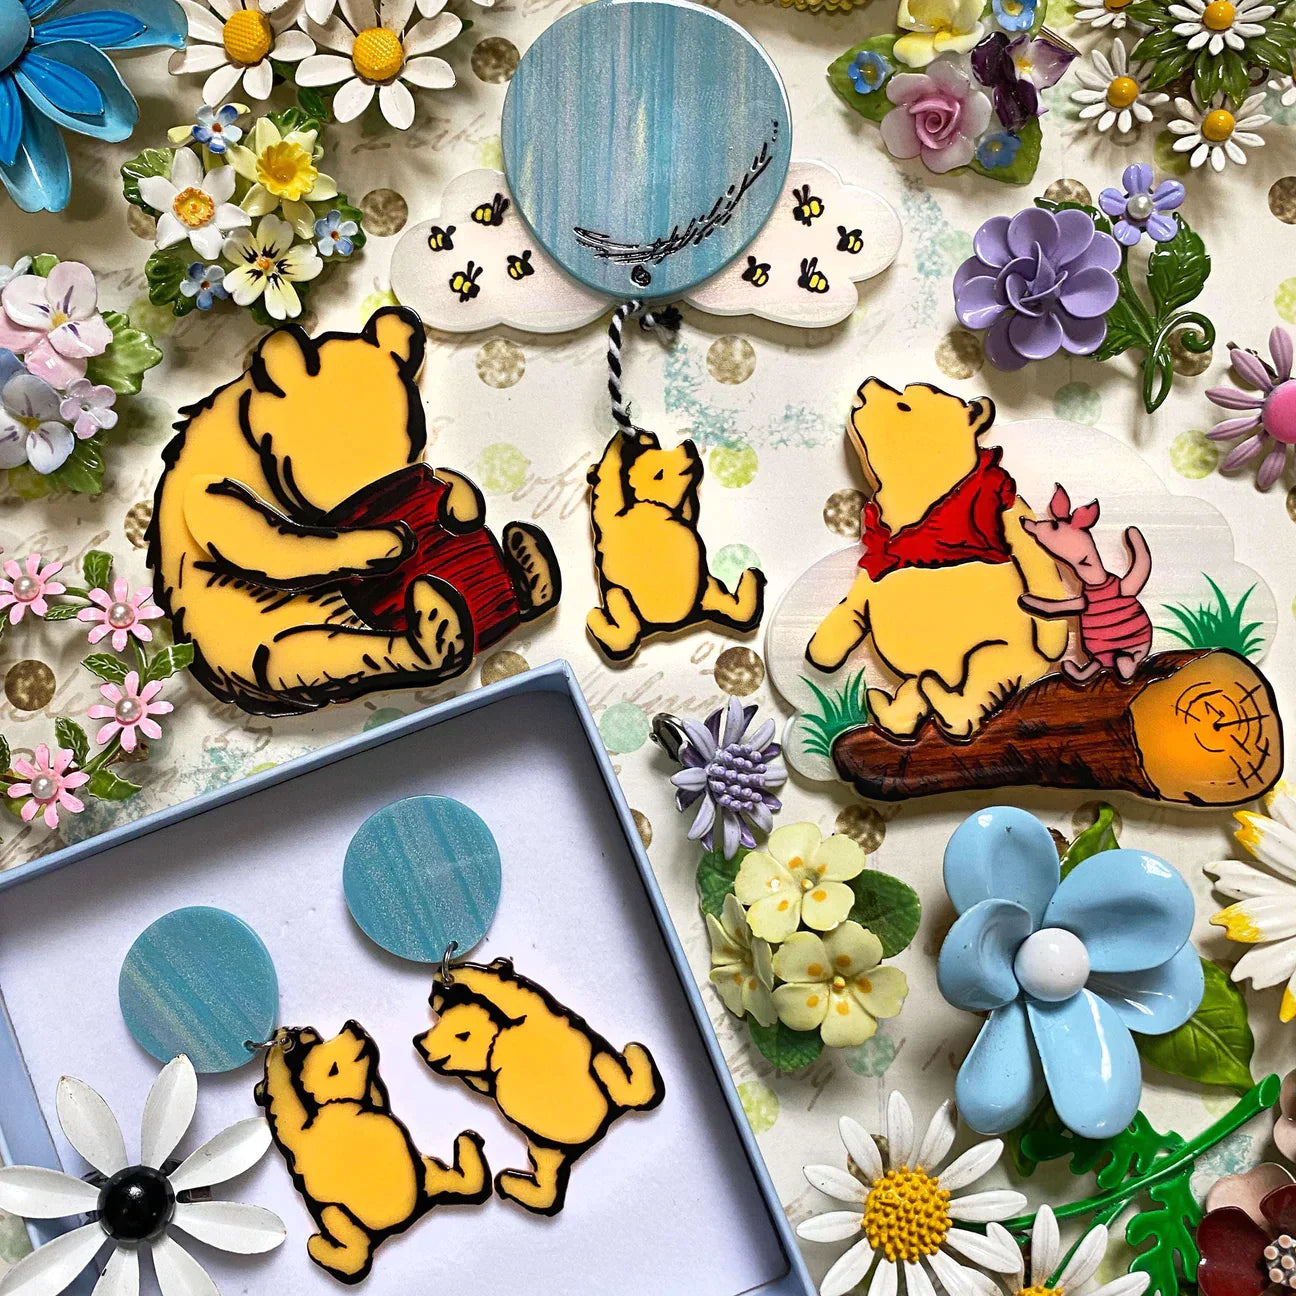 Lipstick & Chrome's A.A. Milne and E.H. Shepard Inspired Pooh Bear Collection - Quirks!